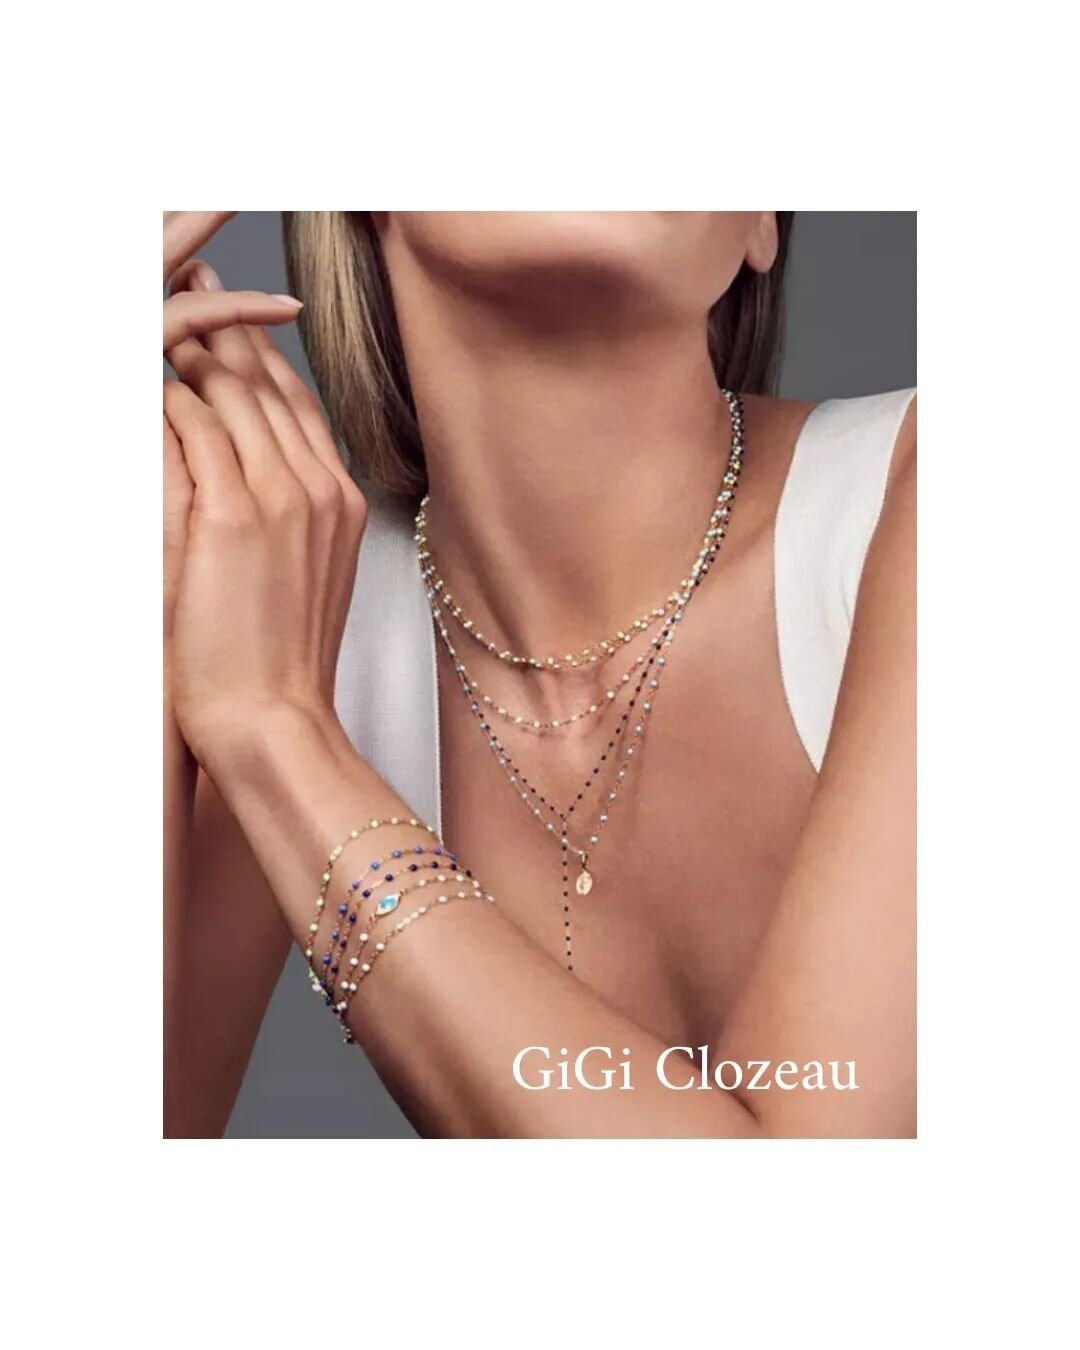 All girls love their Gigi 💕💕

Stunning Summer colours now in stock
Pearl, gold, turquoise, pink, white &amp; the classics of khaki, navy &amp; grey.

Time to up your summer jewelry game 

Exclusively available at JuJu Greystones now ✨✨✨